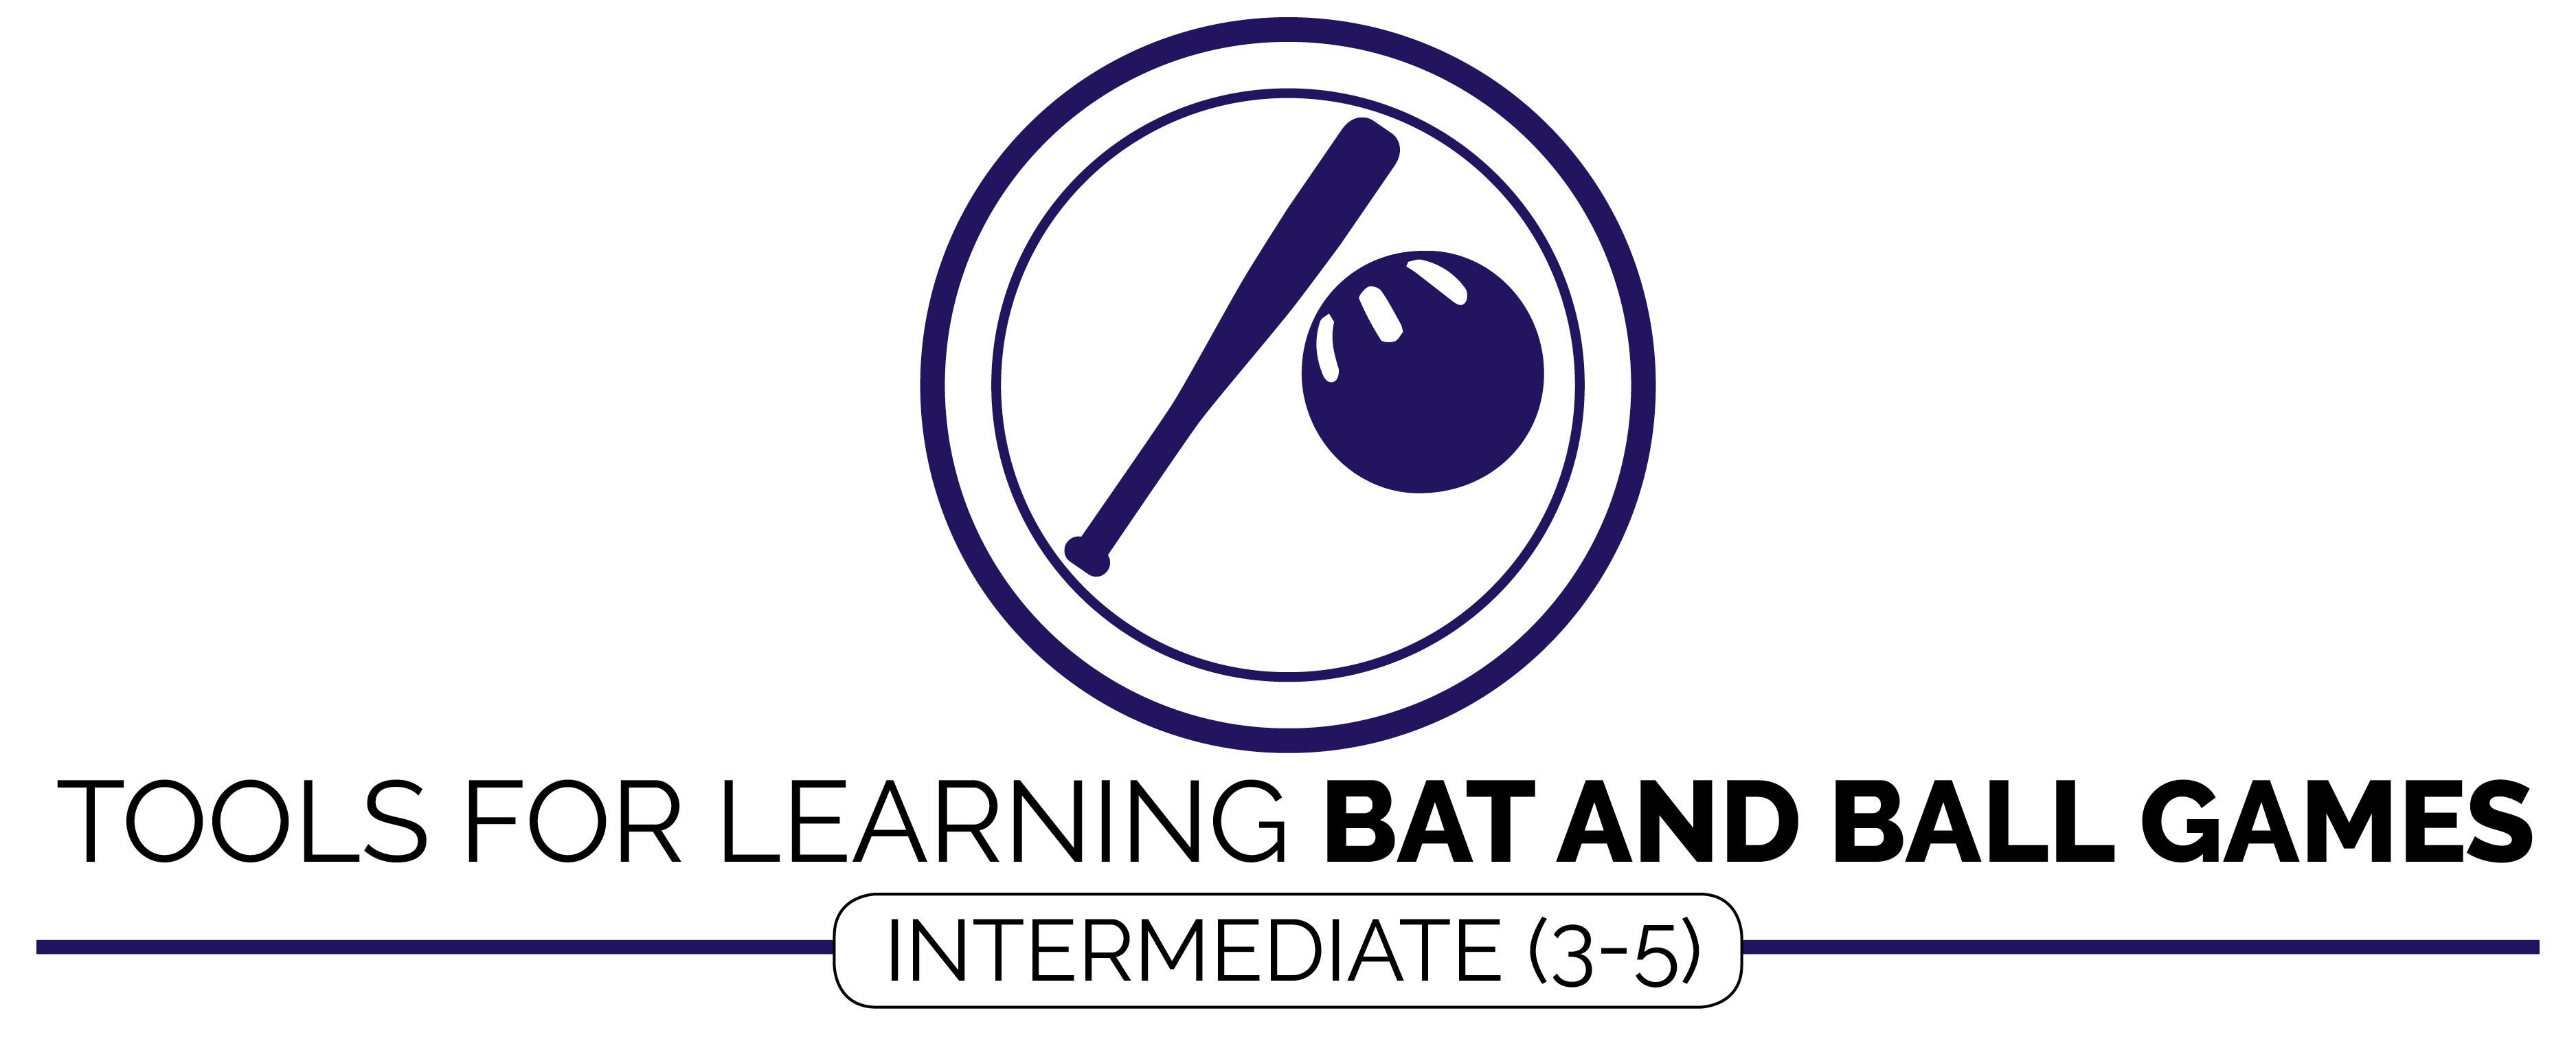 Bat and Ball Feature Image